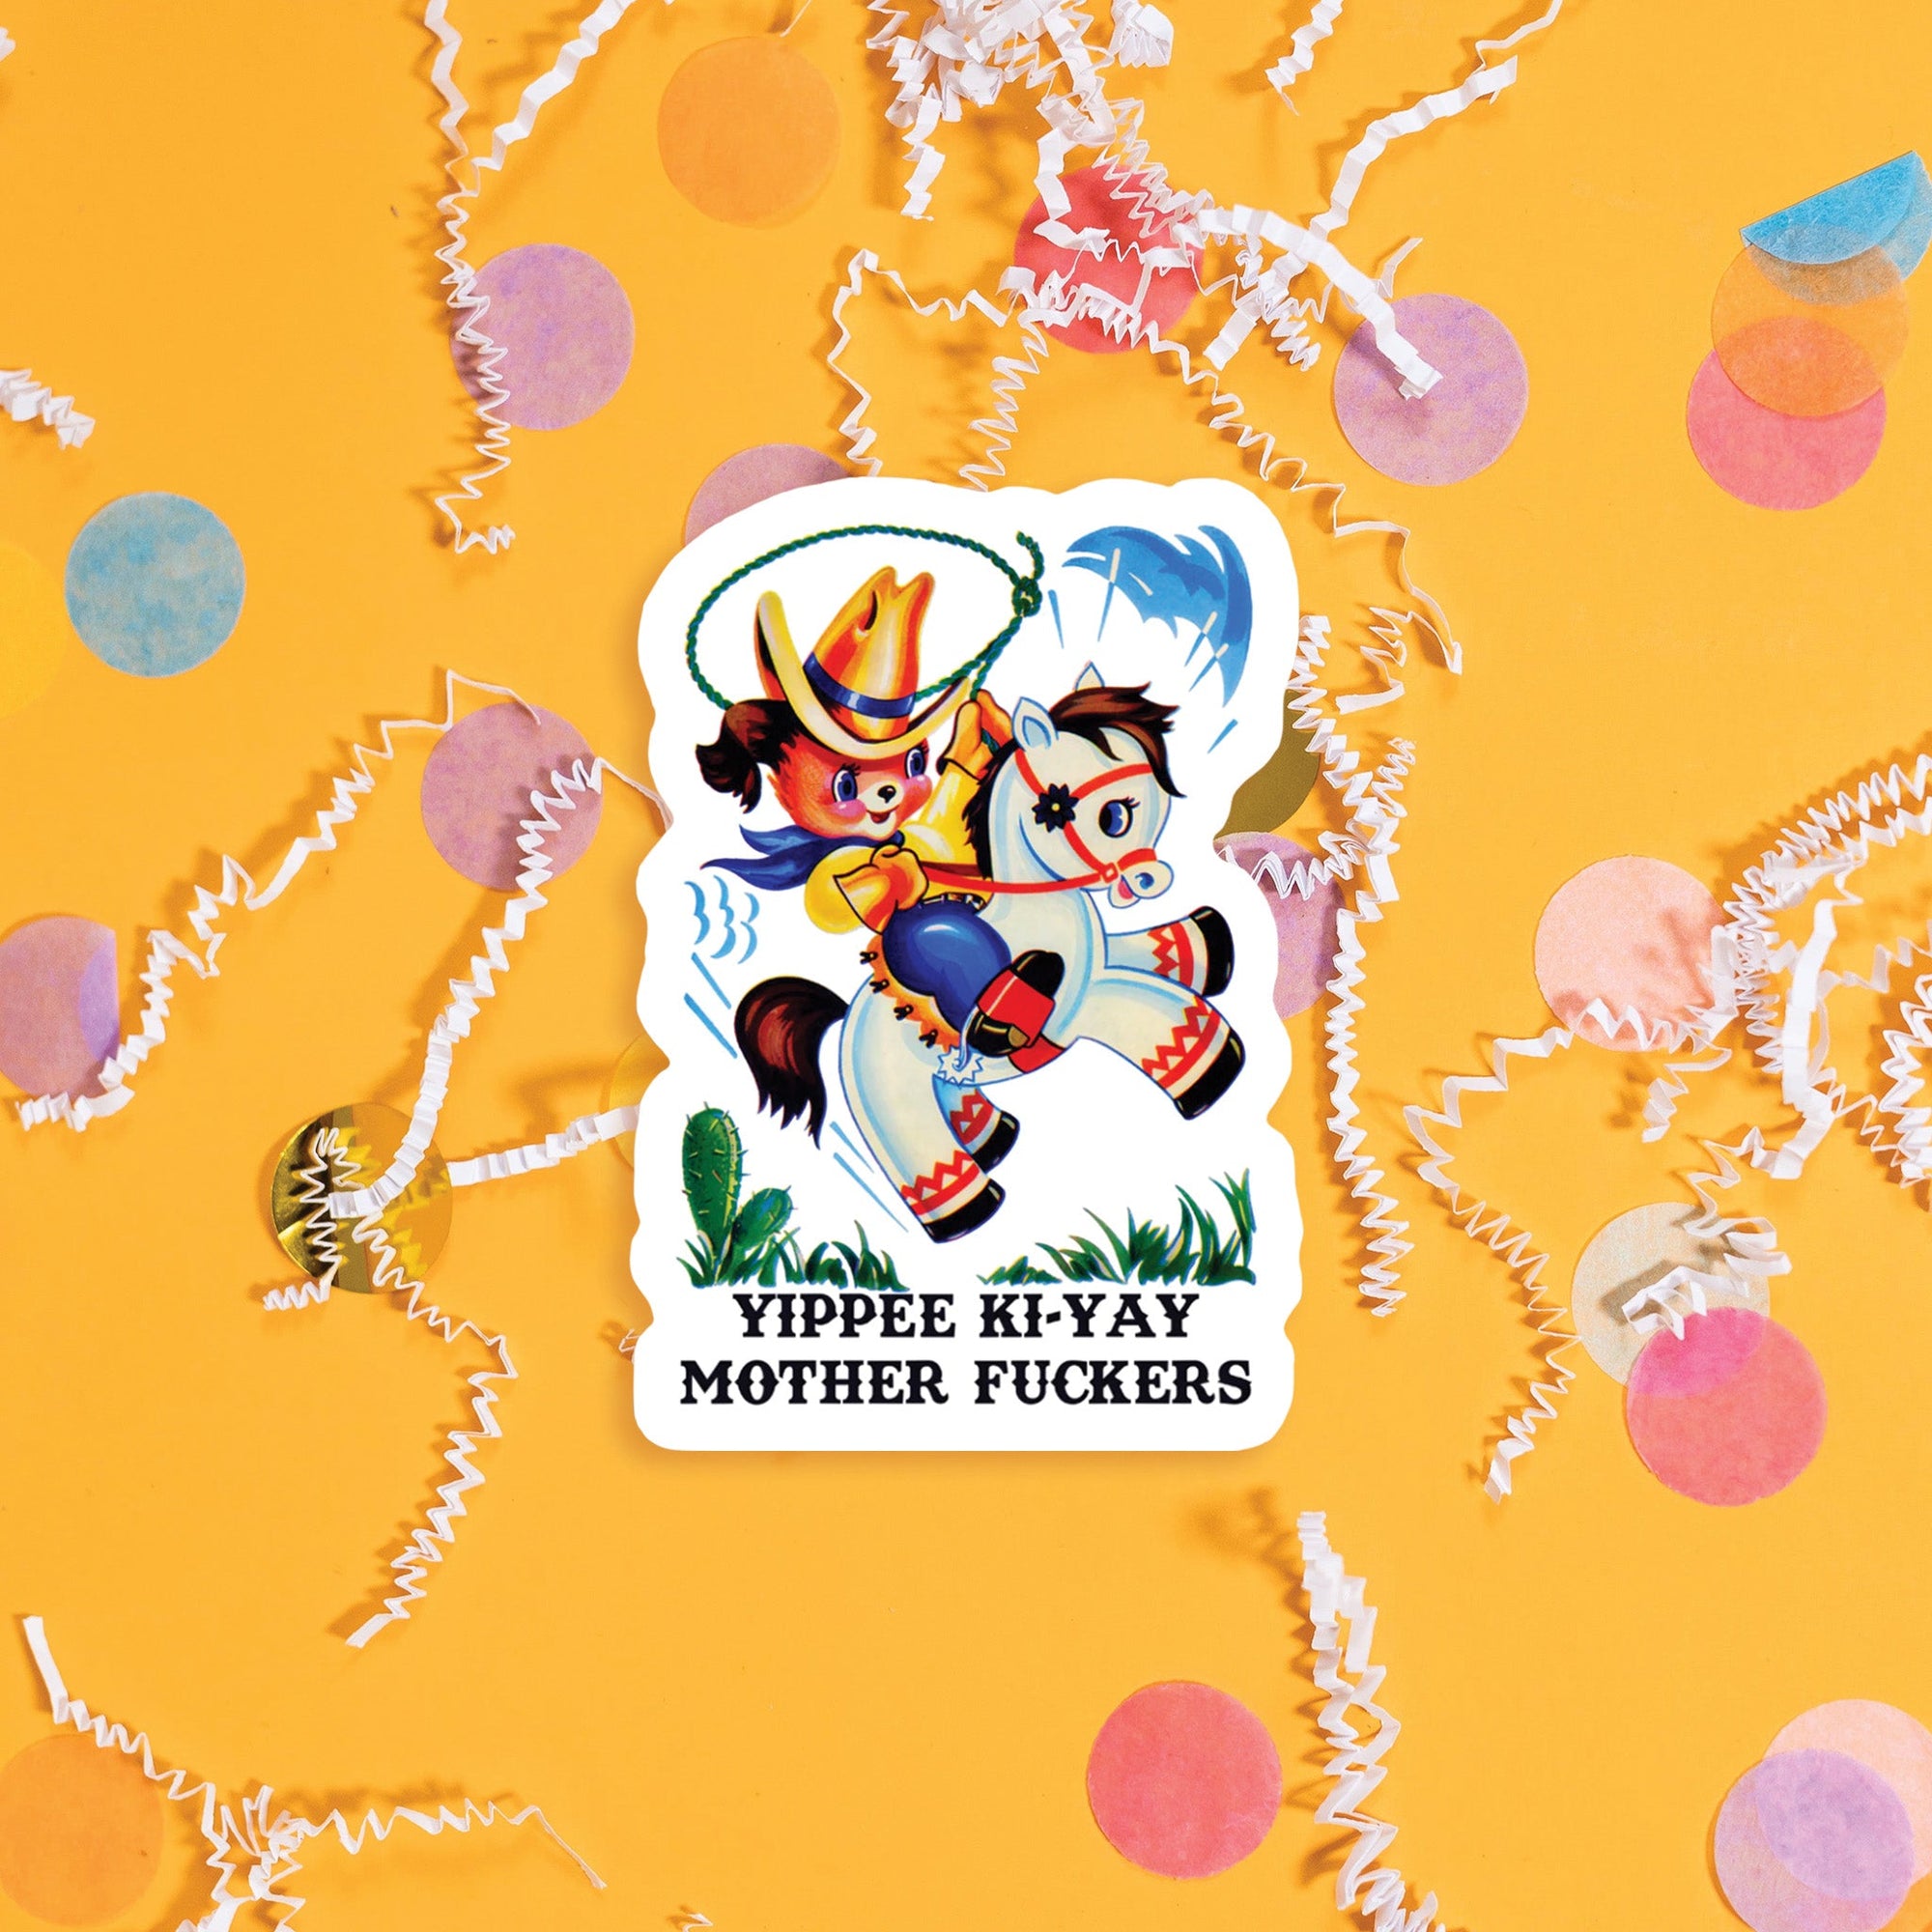 On a sunny mustard background sits a sticker with colorful confetti and white crinkle scattered around. This vintage sticker has an illustration of a cute brown puppy riding a white pony with a lasso in it's hand It is dressed as a cowboy. It says "YIPPEE KI-YAY MOTHER FUCKERS" in black, all caps western font. Approximately 3".